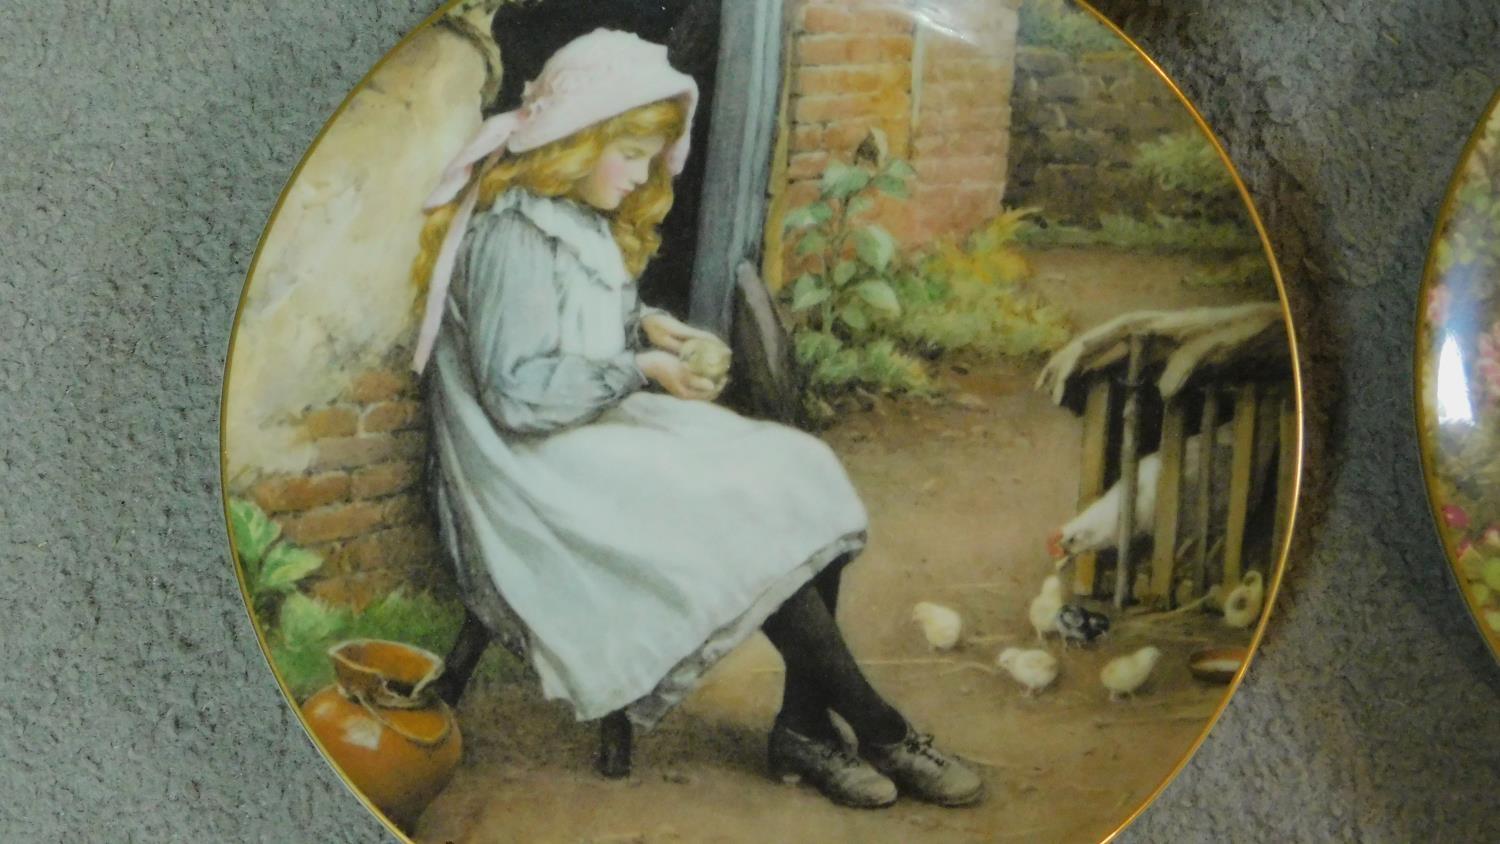 Three limited edition Wedgwood transfer wall plates by Charles Edward Wilson 'Yesterday's Child' - Image 4 of 5